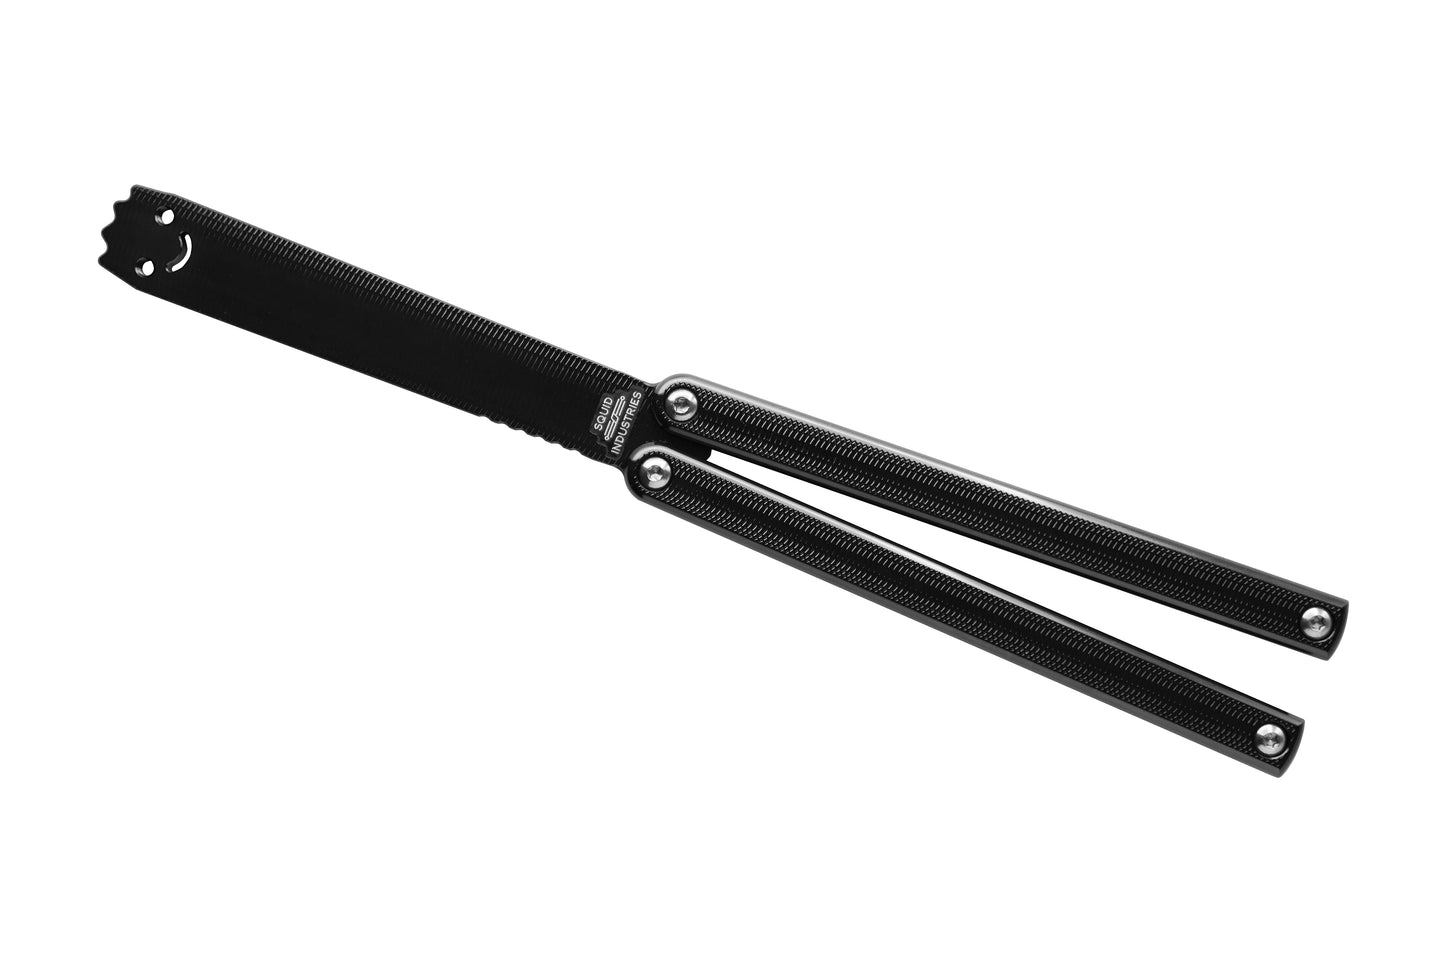 Black Squiddy-AL Balisong Butterfly Knife Trainer with Silver Hardware